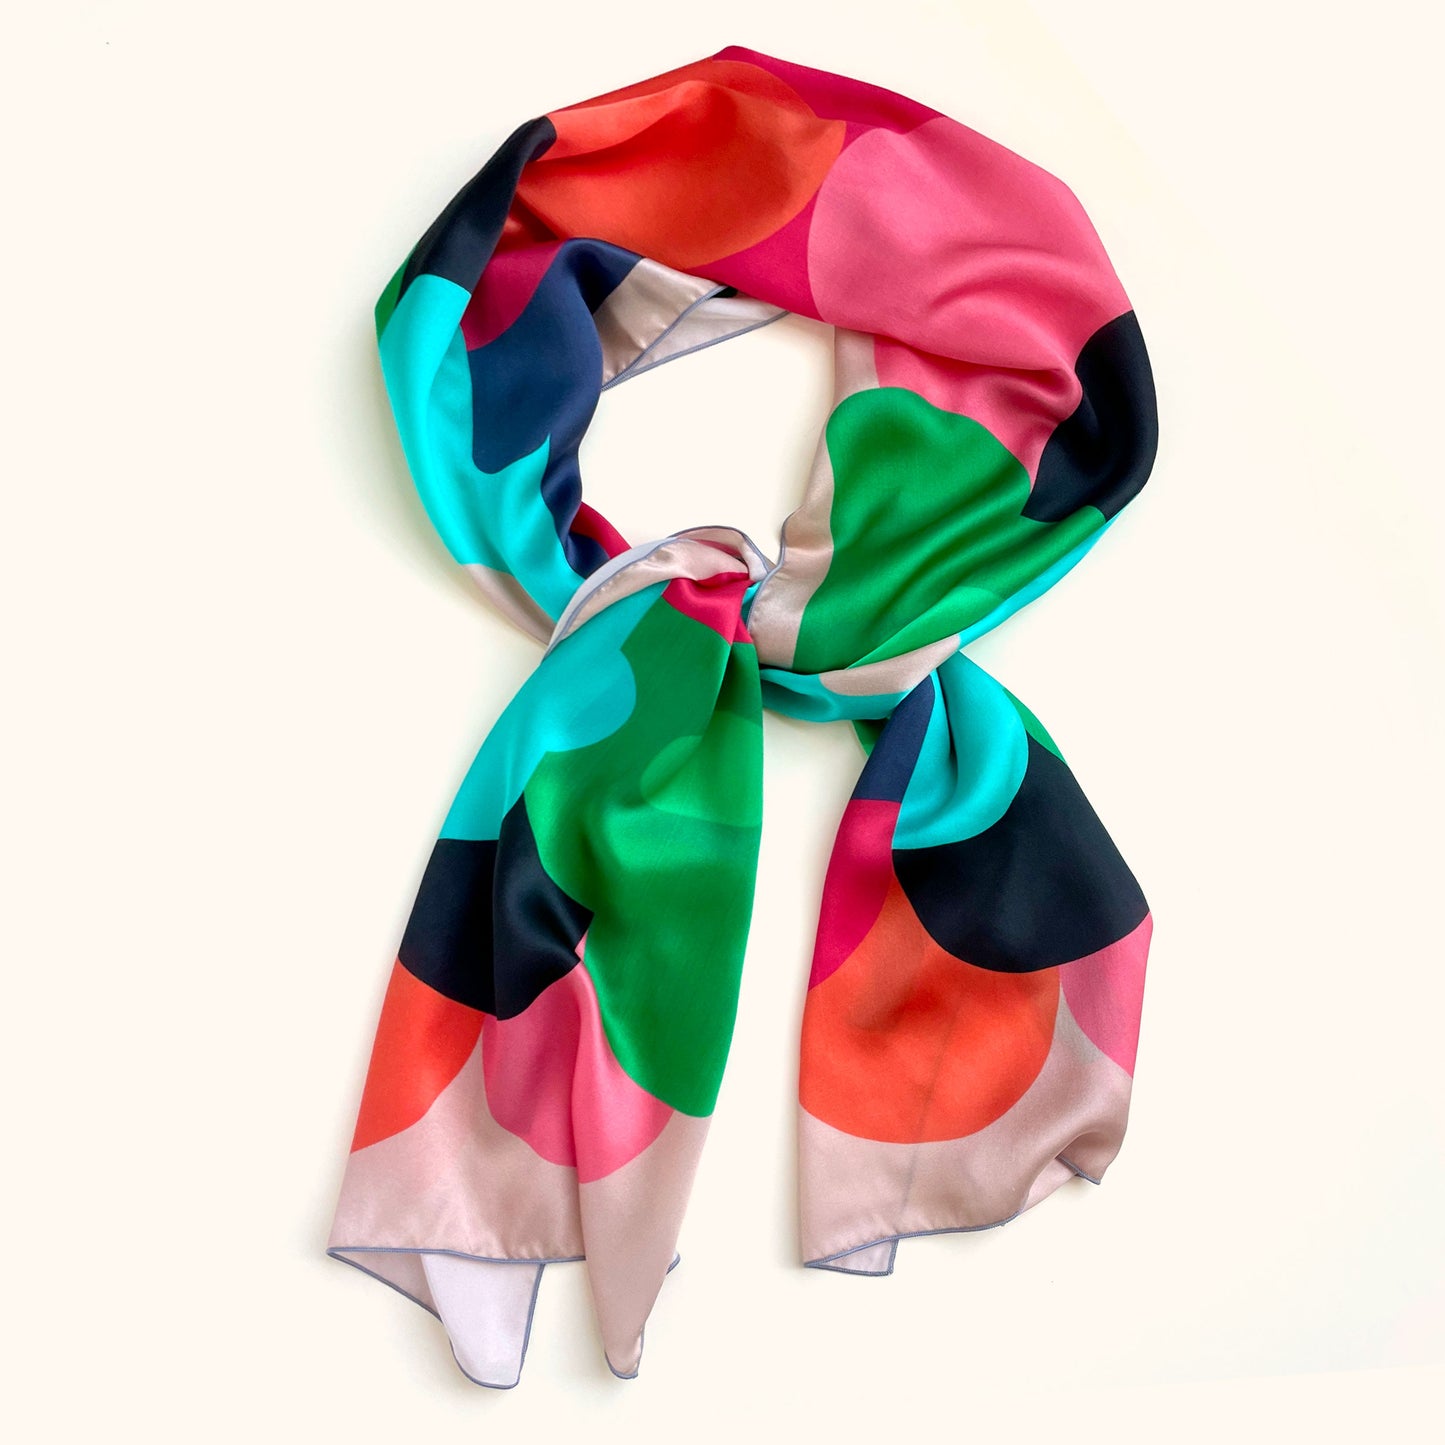 Bold designer retro long silk scarf. With pink, green, red and black for drama, this takes scarves to the max! What outfit doesn't match this scarf? Wear this in your hair, or on your purse for that touch of luxury